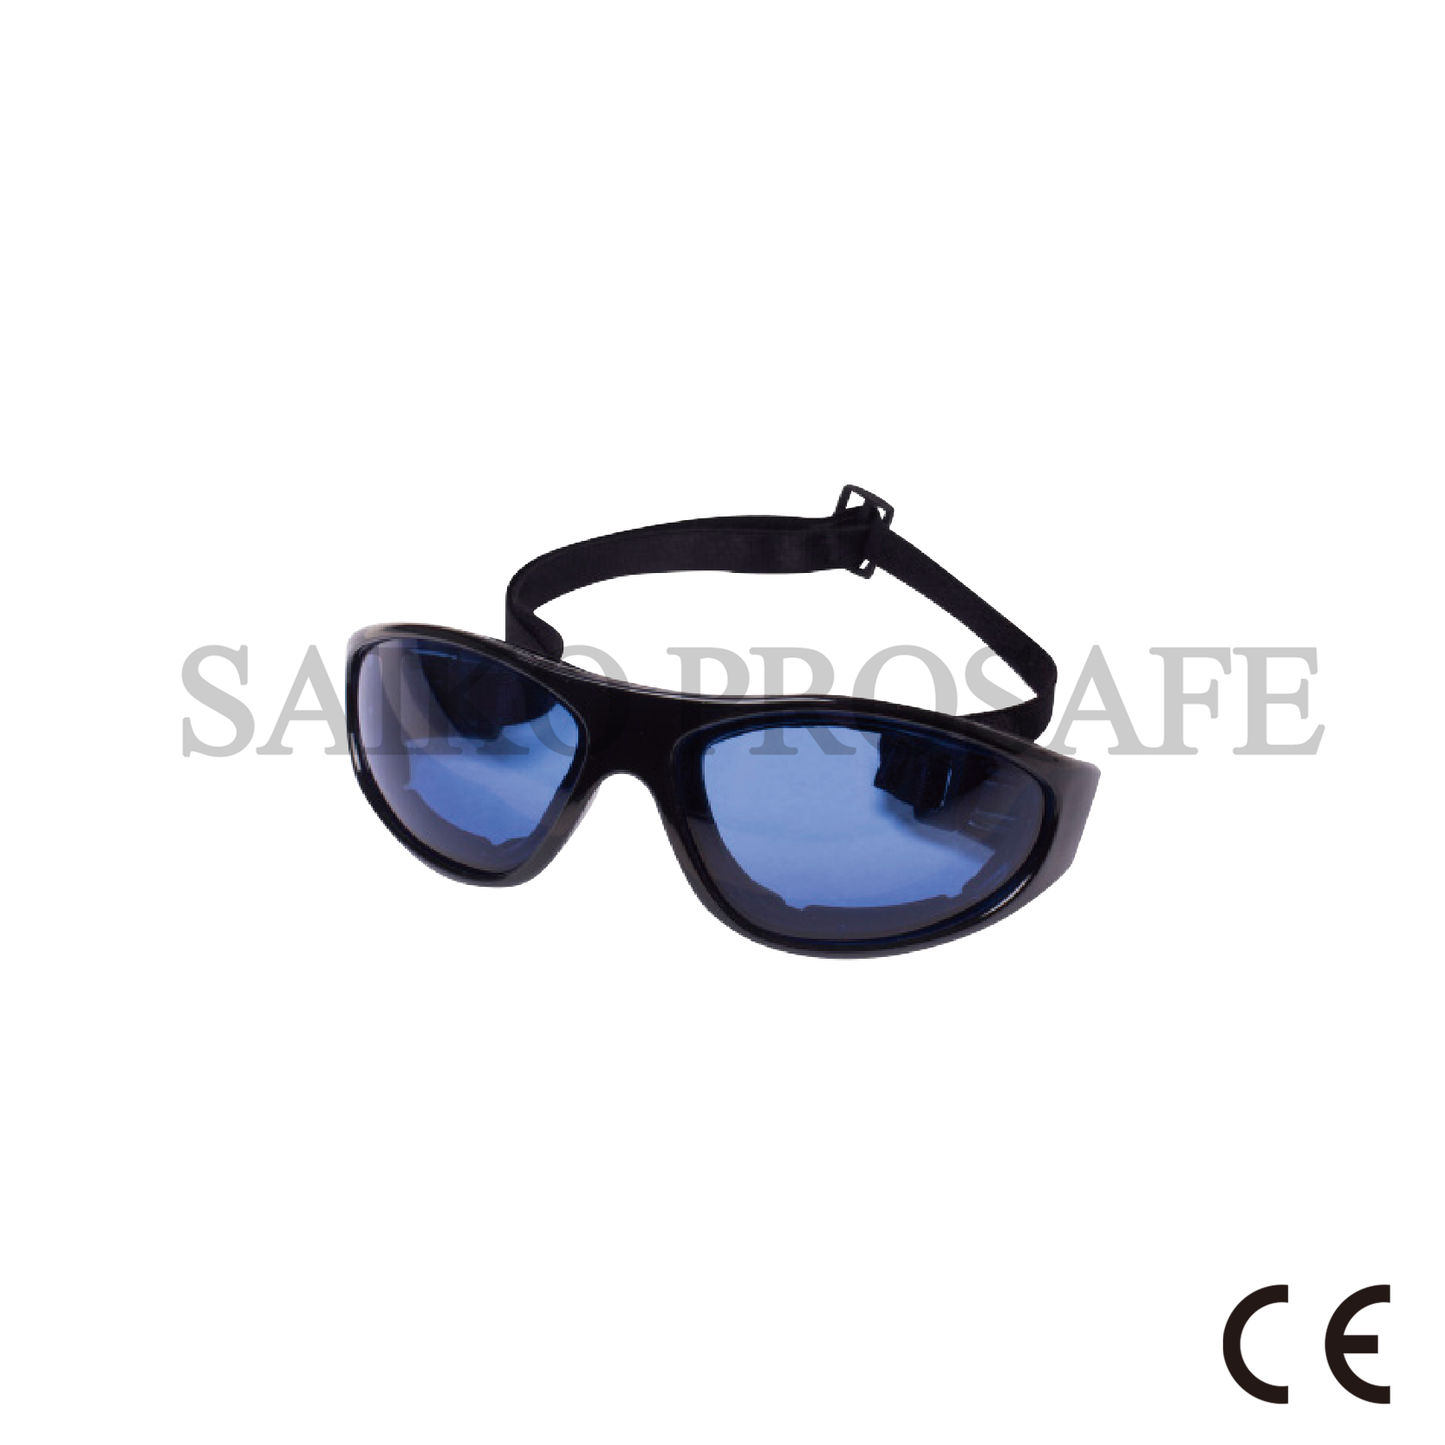 Safety spectacles SAFETY GLASSES KM1502062